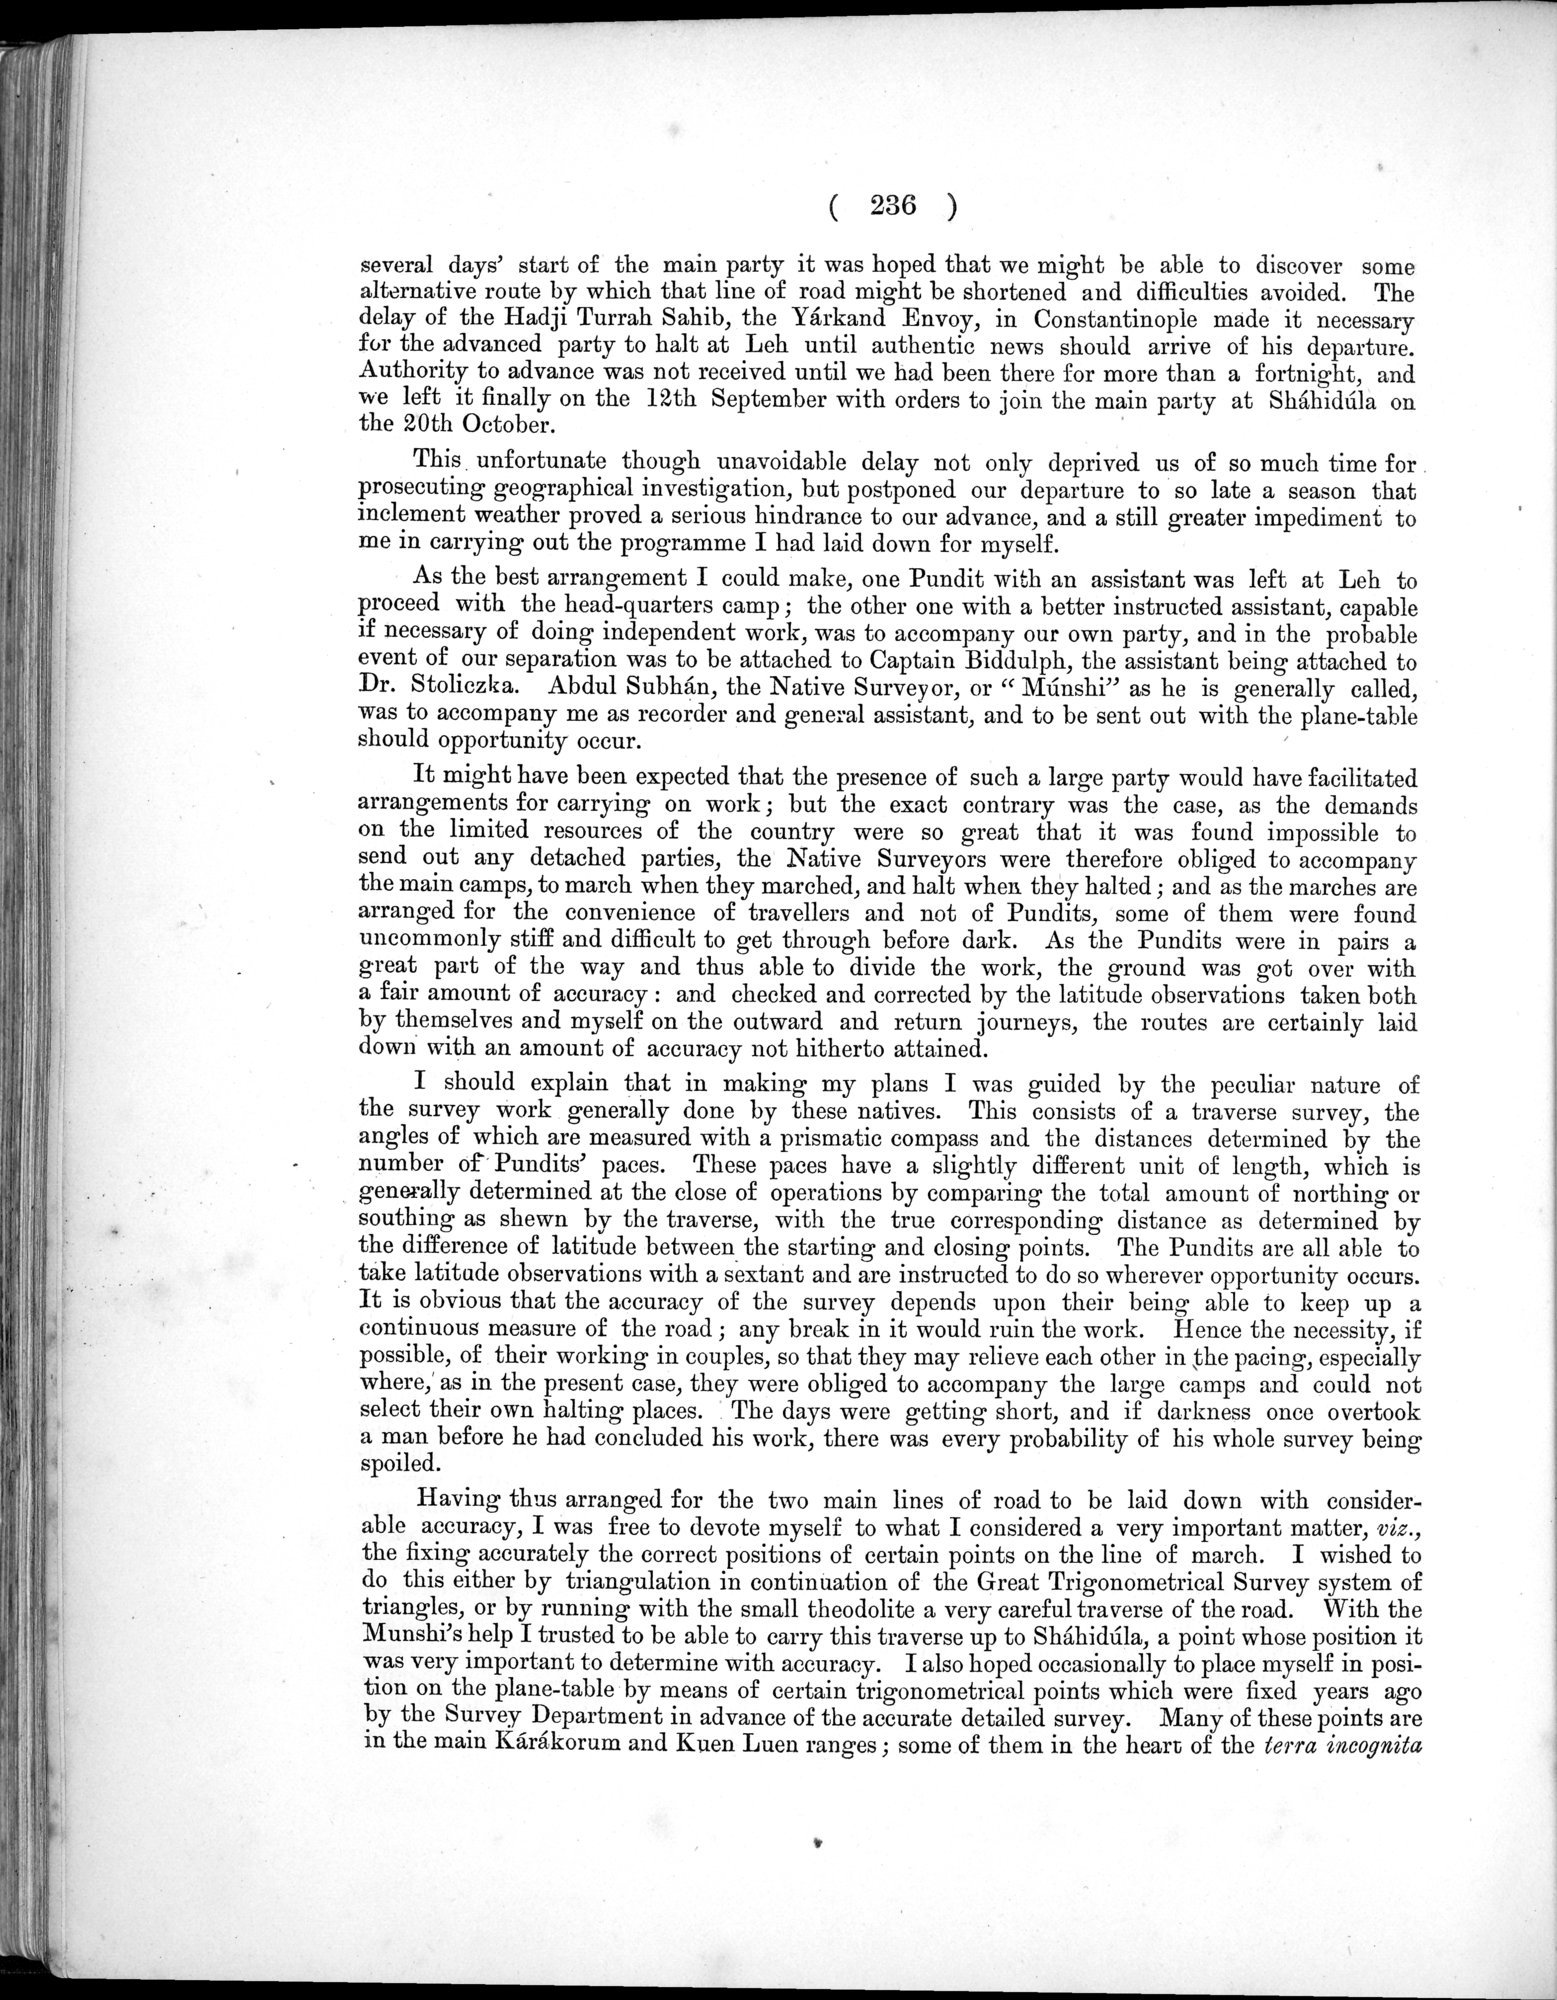 Report of a Mission to Yarkund in 1873 : vol.1 / Page 336 (Grayscale High Resolution Image)